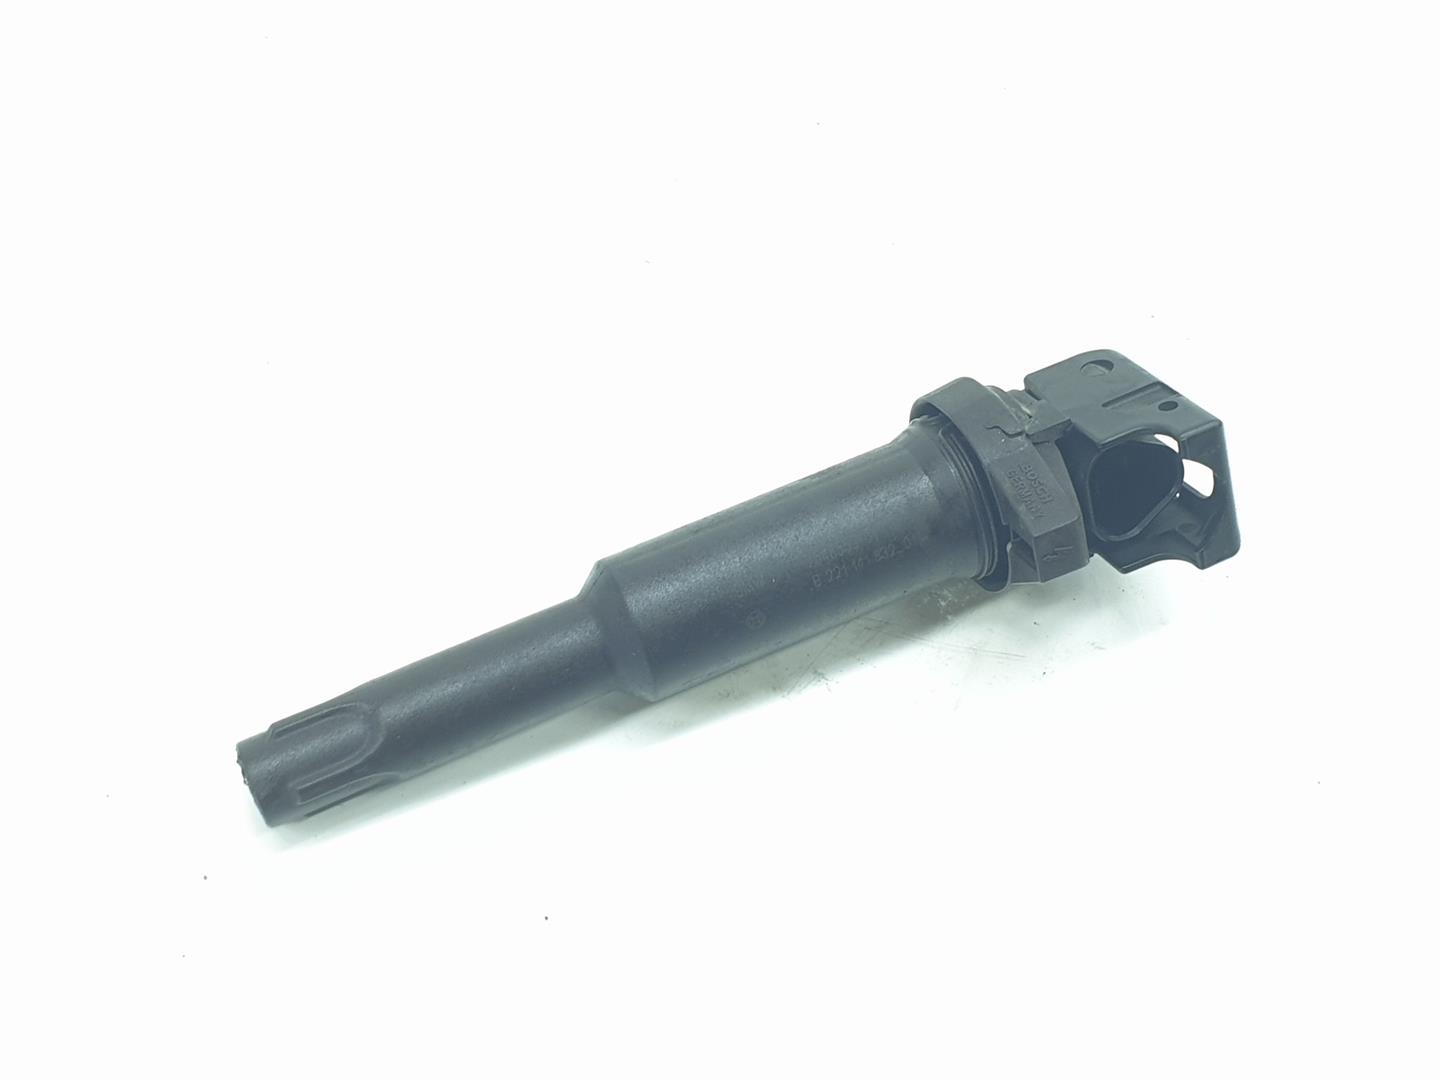 BMW 6 Series E63/E64 (2003-2010) High Voltage Ignition Coil 7548553, 7548553, 1111AA 24700083